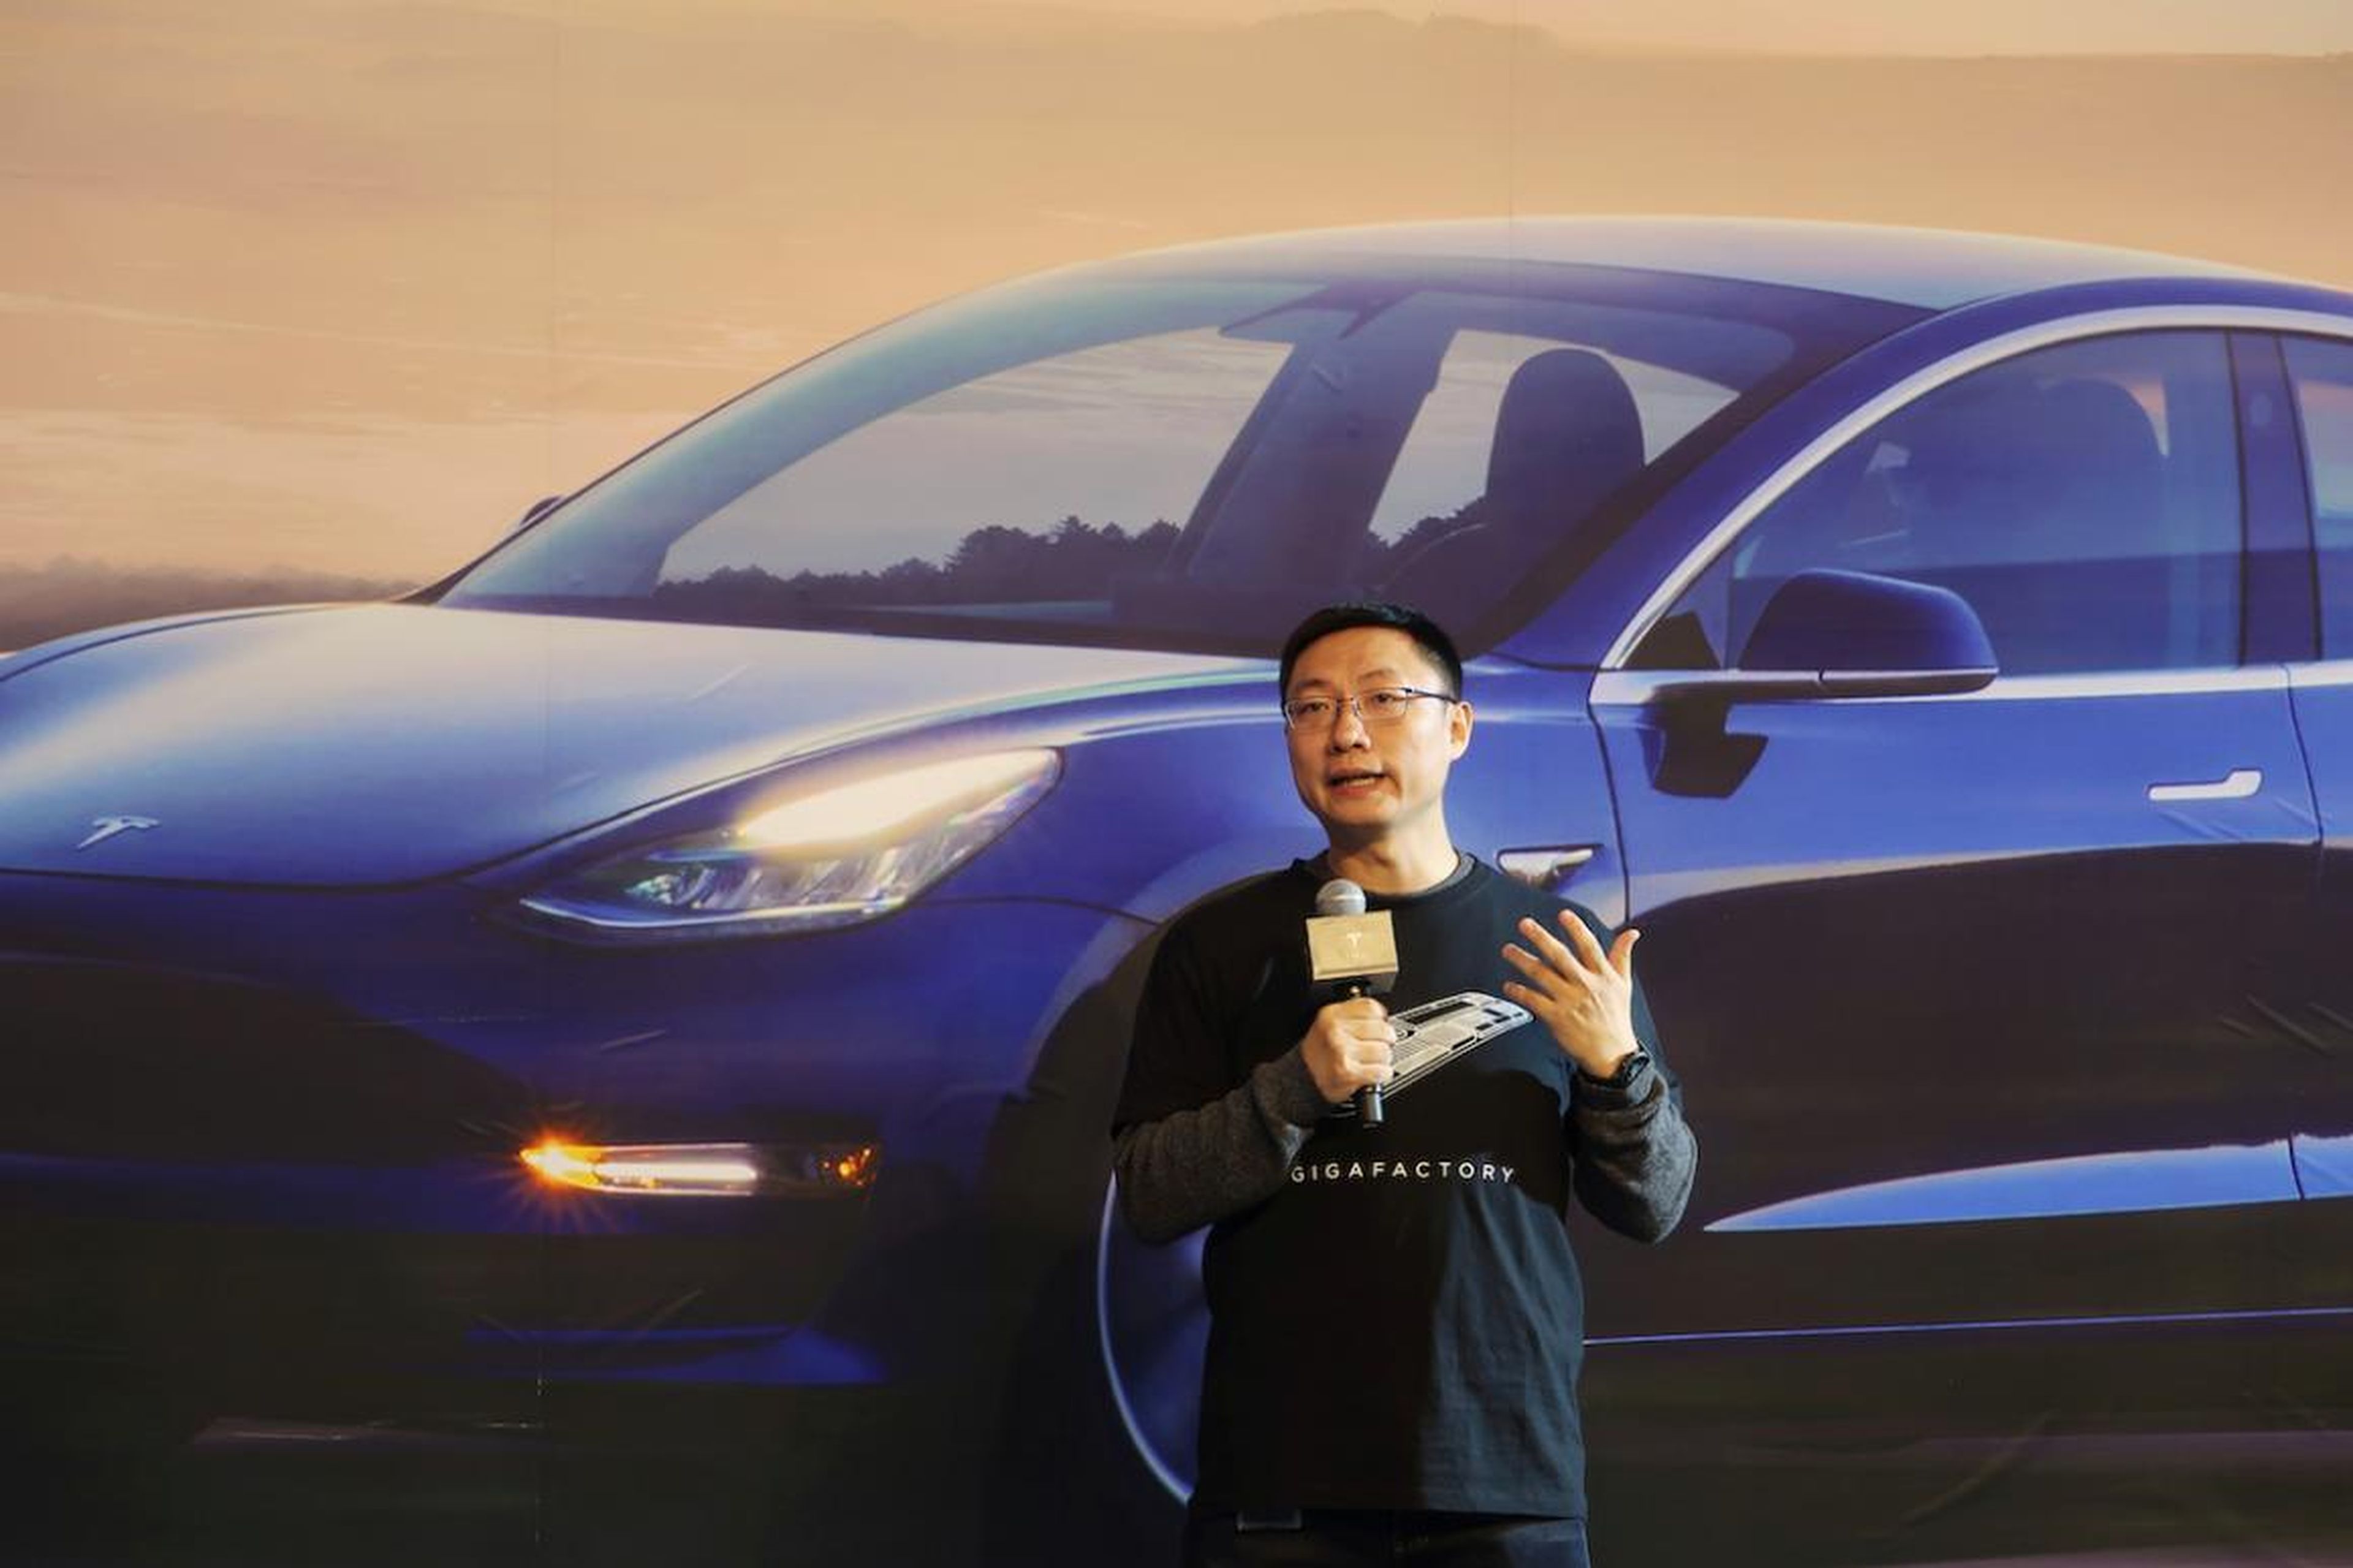 Tesla's China chief Zhu Xiaotong was on hand to oversee the delivery.